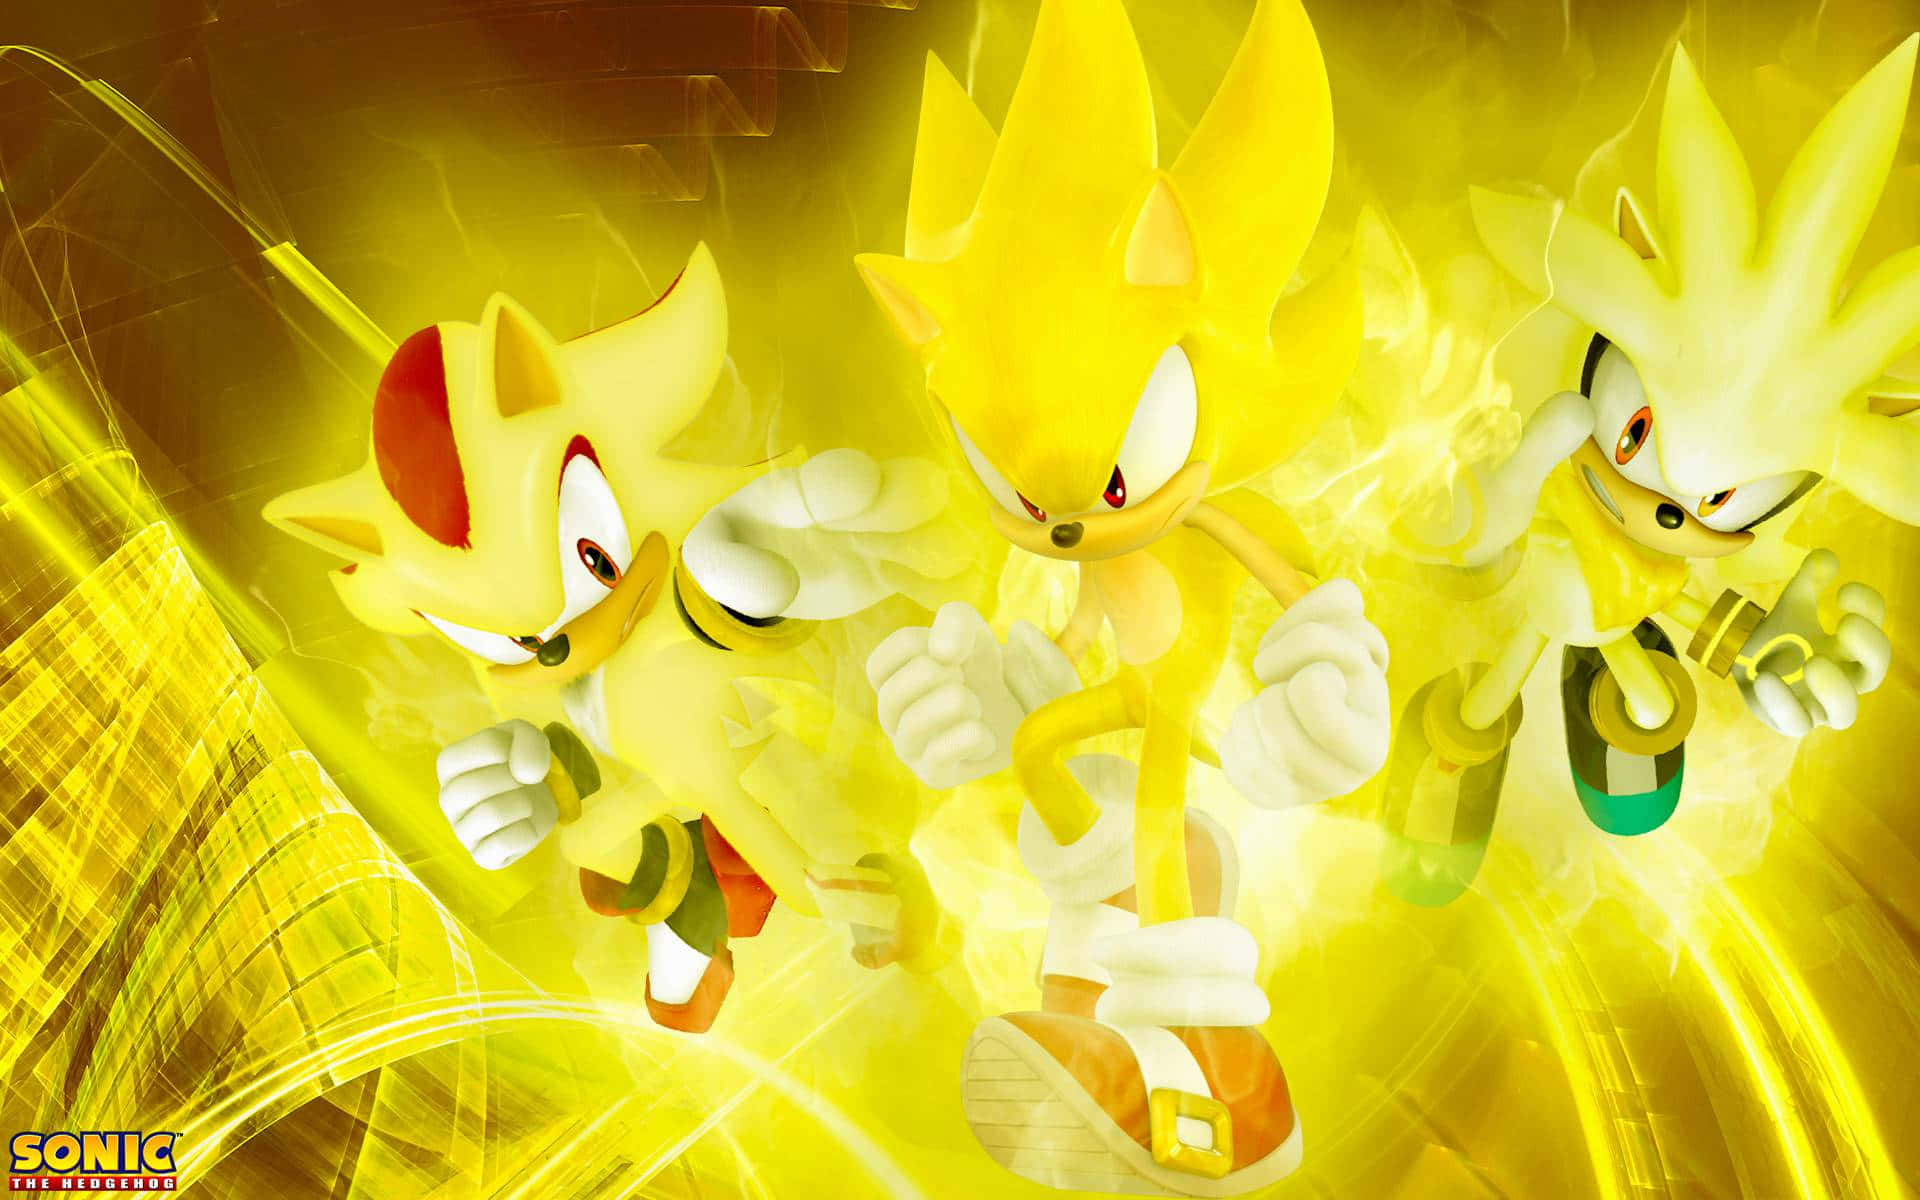 "Get ready to join the adventure with Super Sonic!"